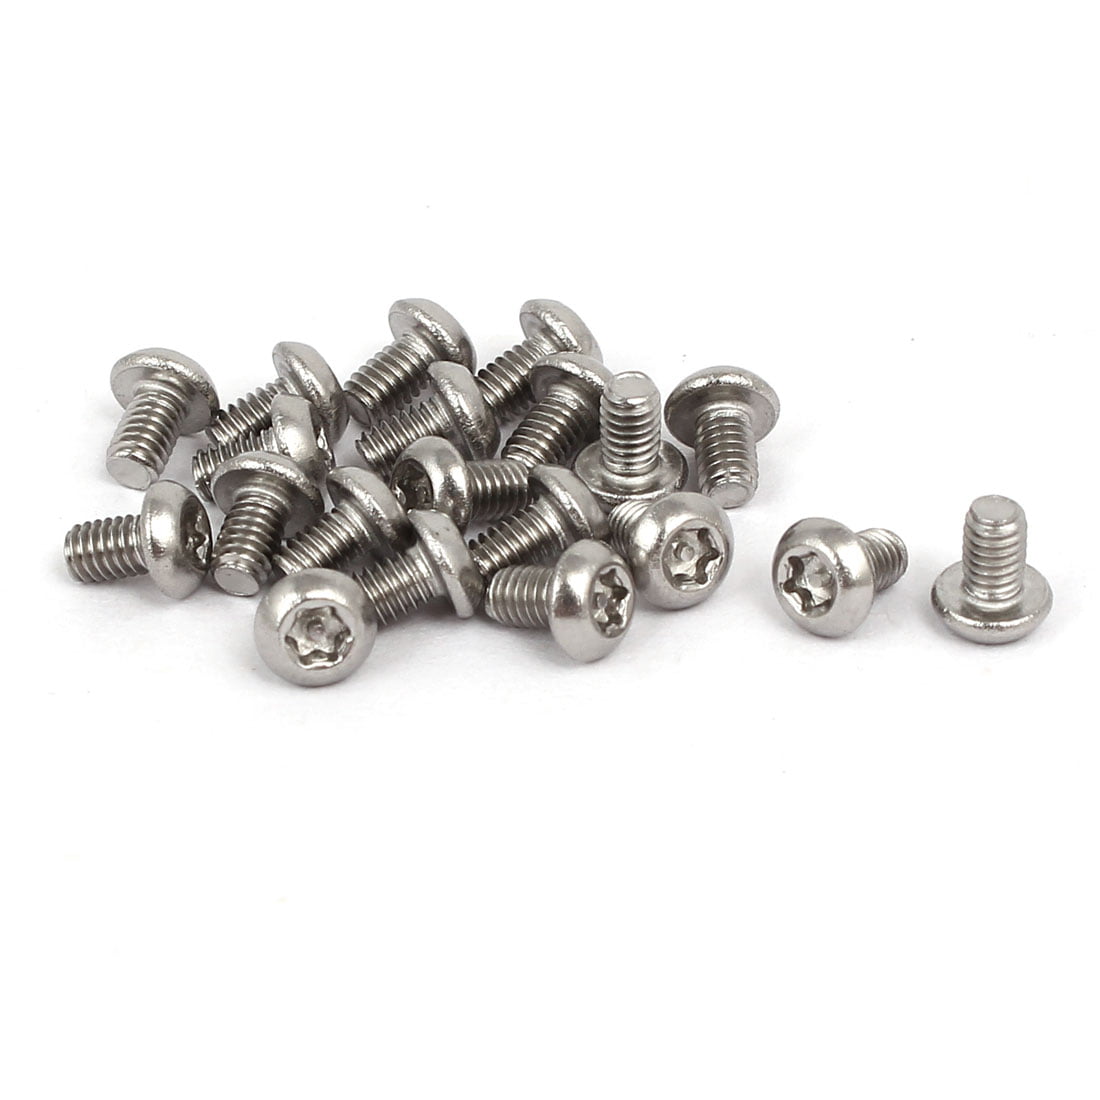 Torx Drive Dome Head Machine Screws M2 M3 M4 Security Bolts 304 Stainless Steel 